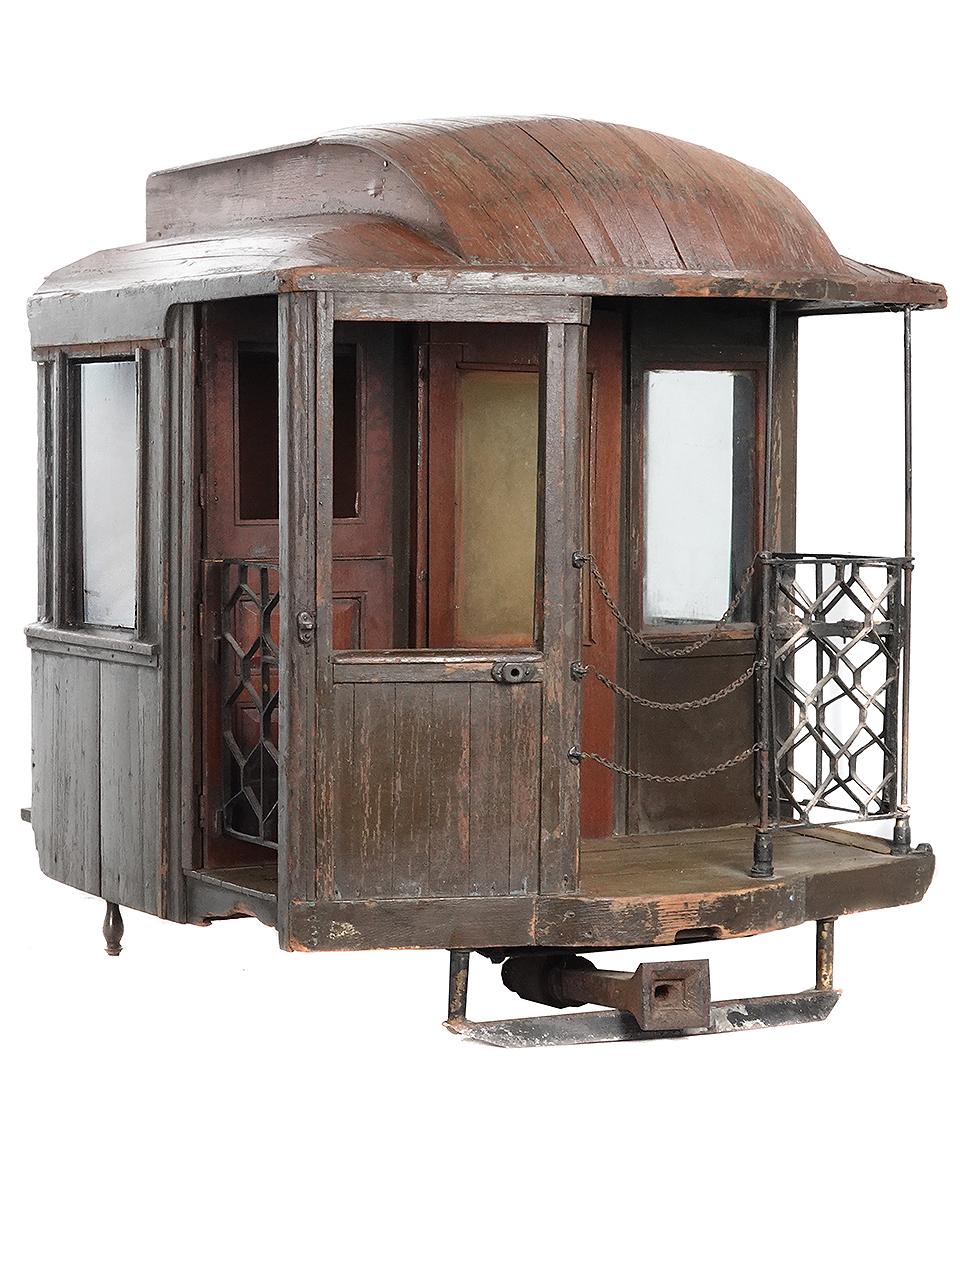 This is a nicely detailed Clerestory Parlor Railway Car salesman sample. It was created for the Jackson and Sharp Company in the mid to late 19th century. I mostly shows the paneled dutch door and how it works with the articulated railing gates. It